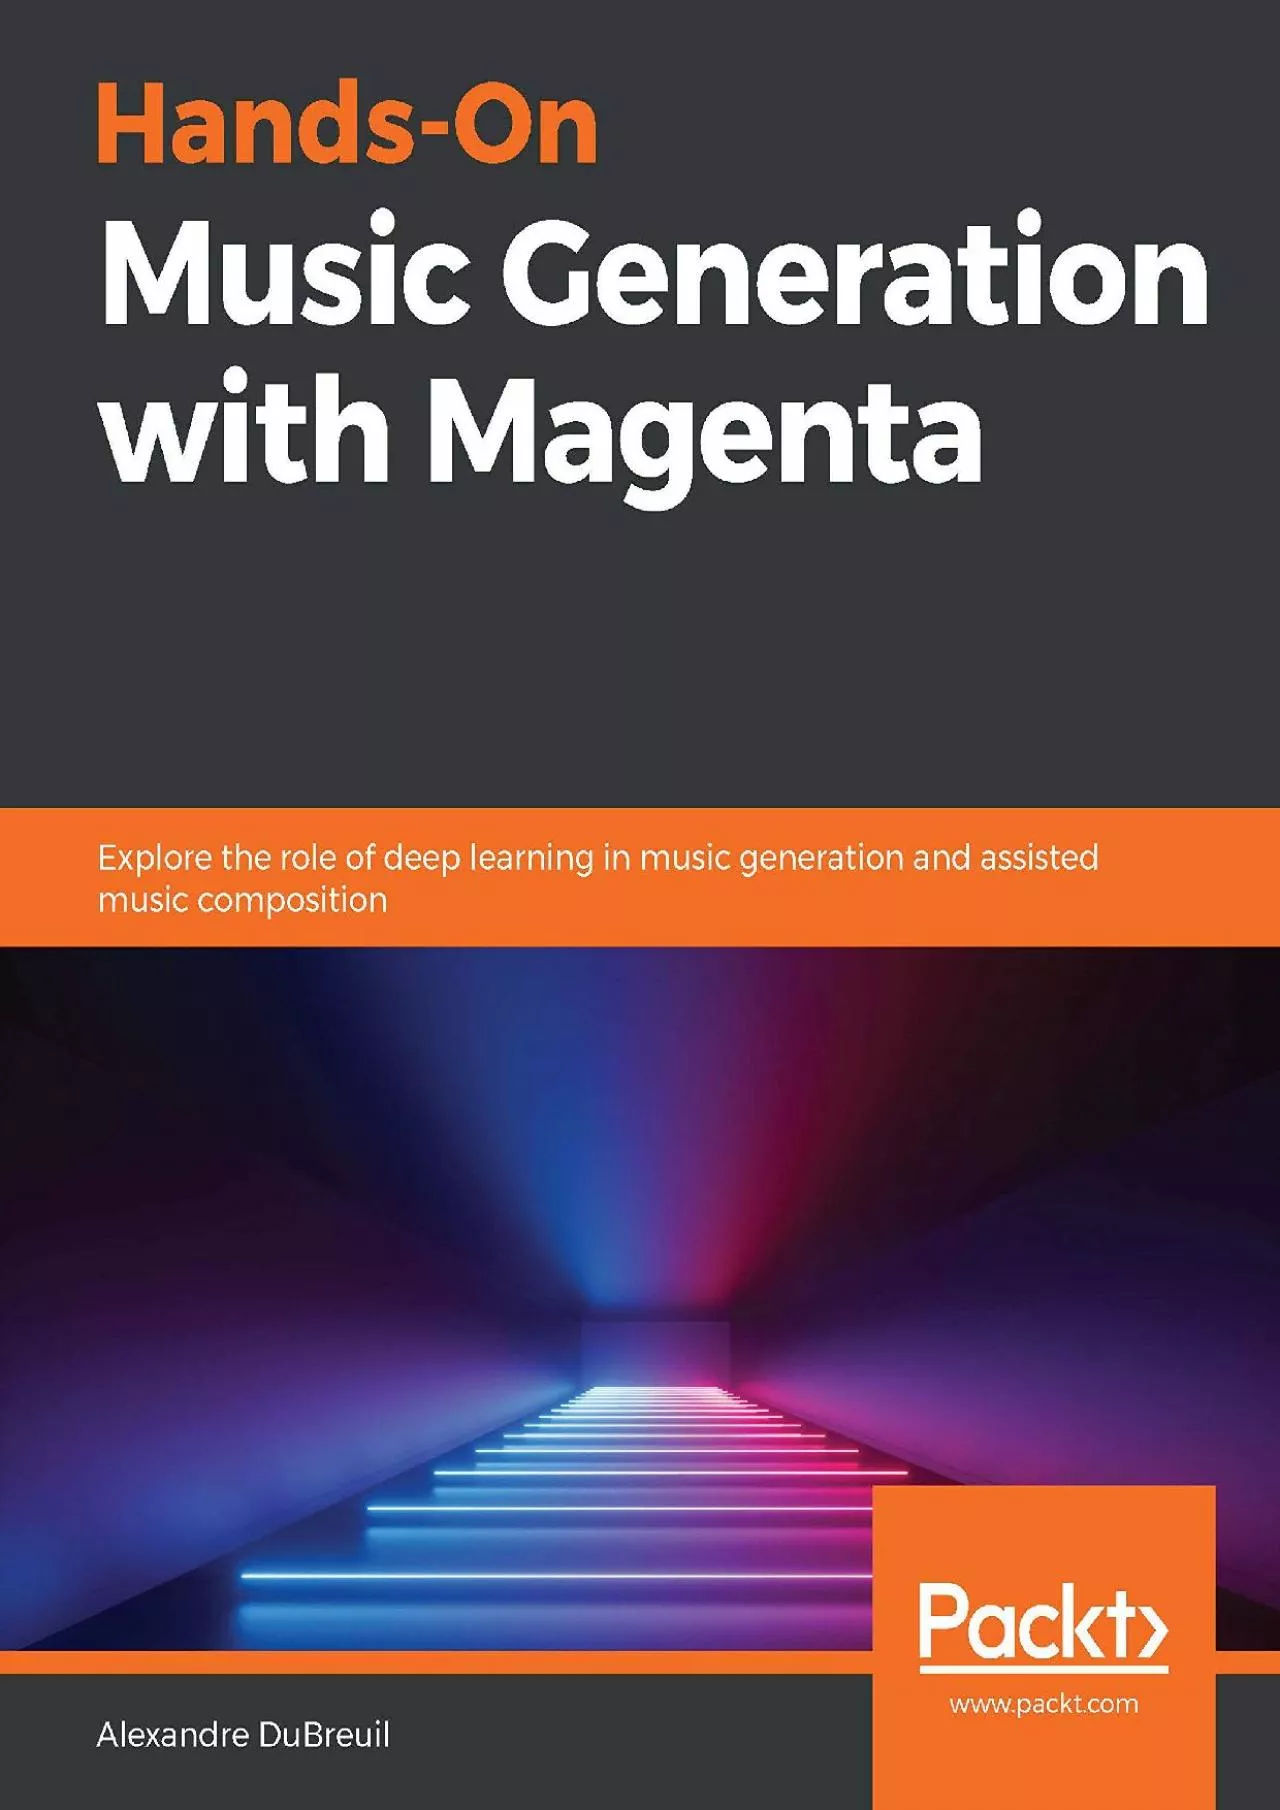 [READ]-Hands-On Music Generation with Magenta: Explore the role of deep learning in music